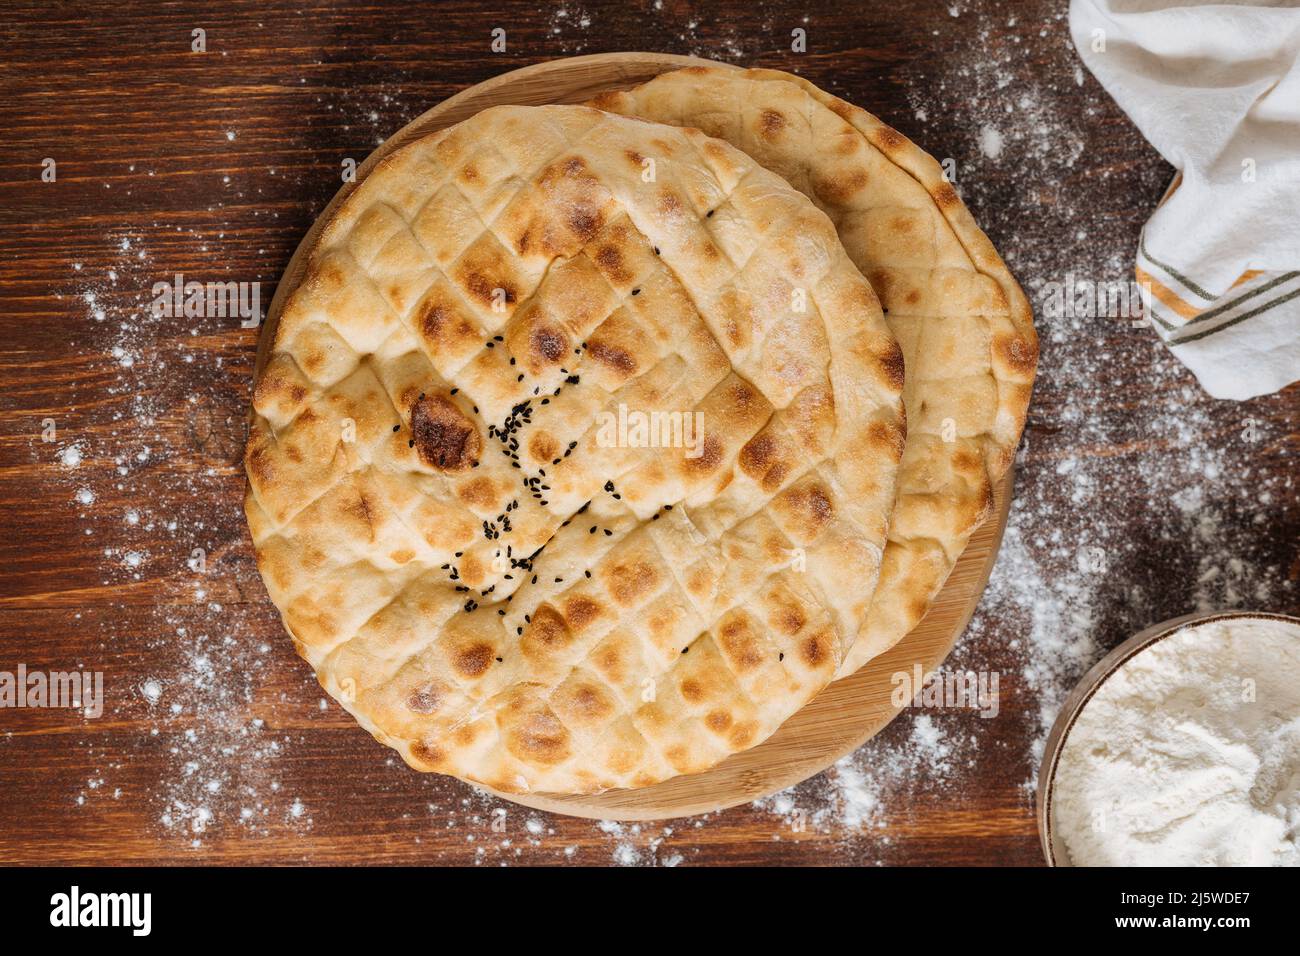 Top view of traditional Turkey or Bosnian pita bread called Somun or Lepina. Popular bread to eat during the month of Ramadan or Eid Mubarak. Rustic w Stock Photo